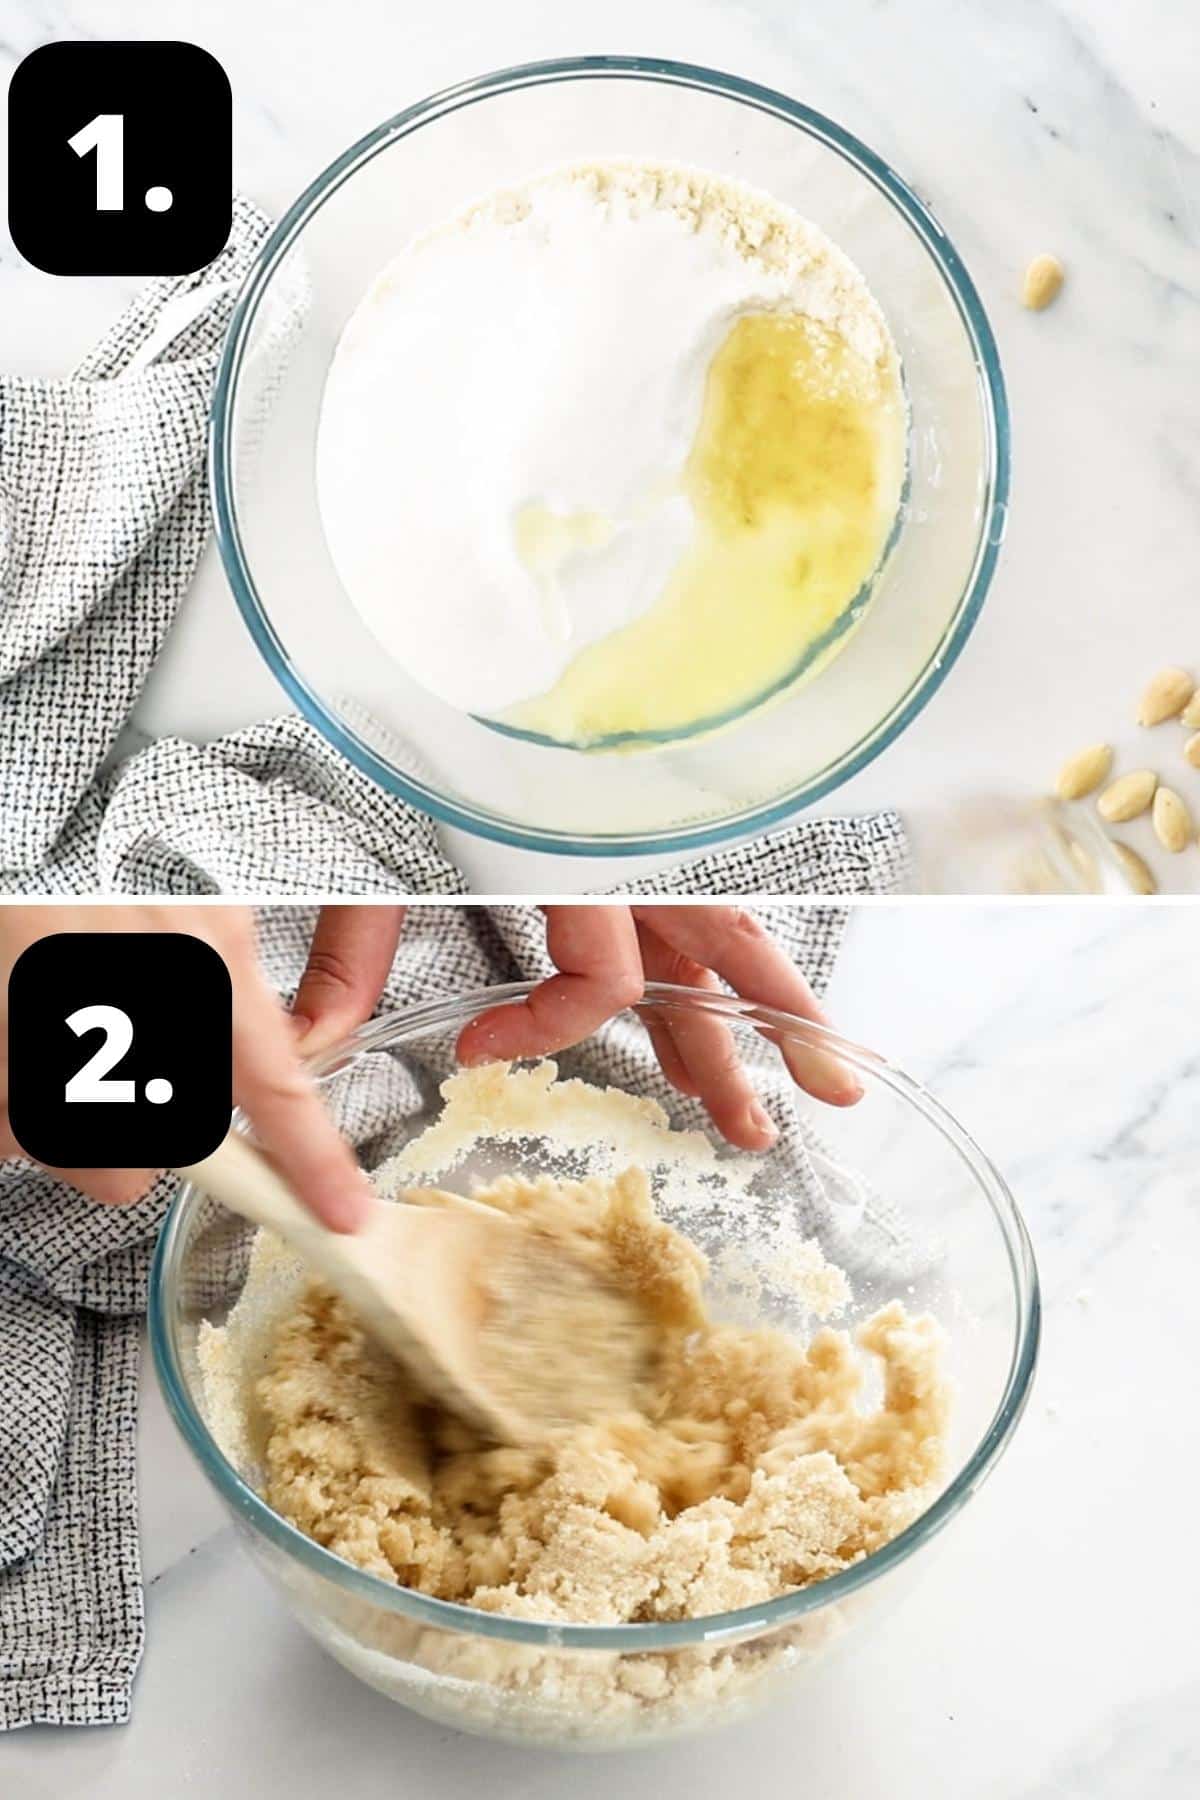 Steps 1-2 of preparing this recipe - the ingredients in a glass bowl and the mixture being combined with a wooden spoon.